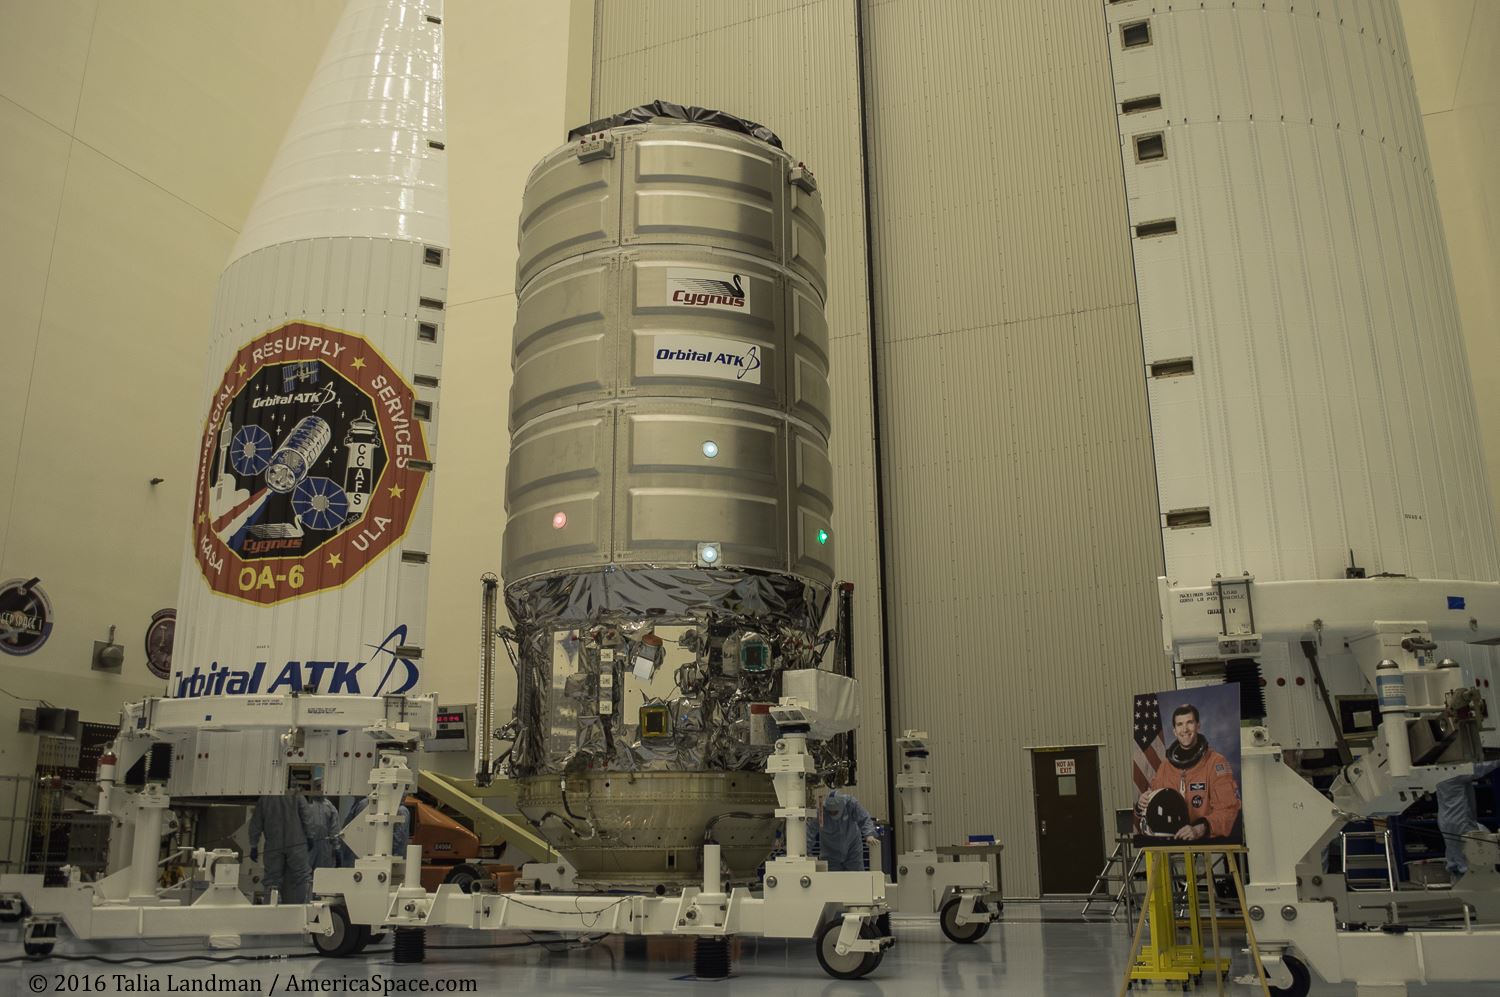 The Orbital ATK Cygnus resupply ship "S.S. Rick Husband", packed with 7,700 pounds of supplies, hardware and experiments, undergoing final processing in the KSC clean room March 8, ahead of its scheduled launch to the ISS atop a ULA Atlas-V booster from nearby Cape Canaveral Launch Complex 41 on the night of March 22. Photo Credit: Talia Landman / AmericaSpace